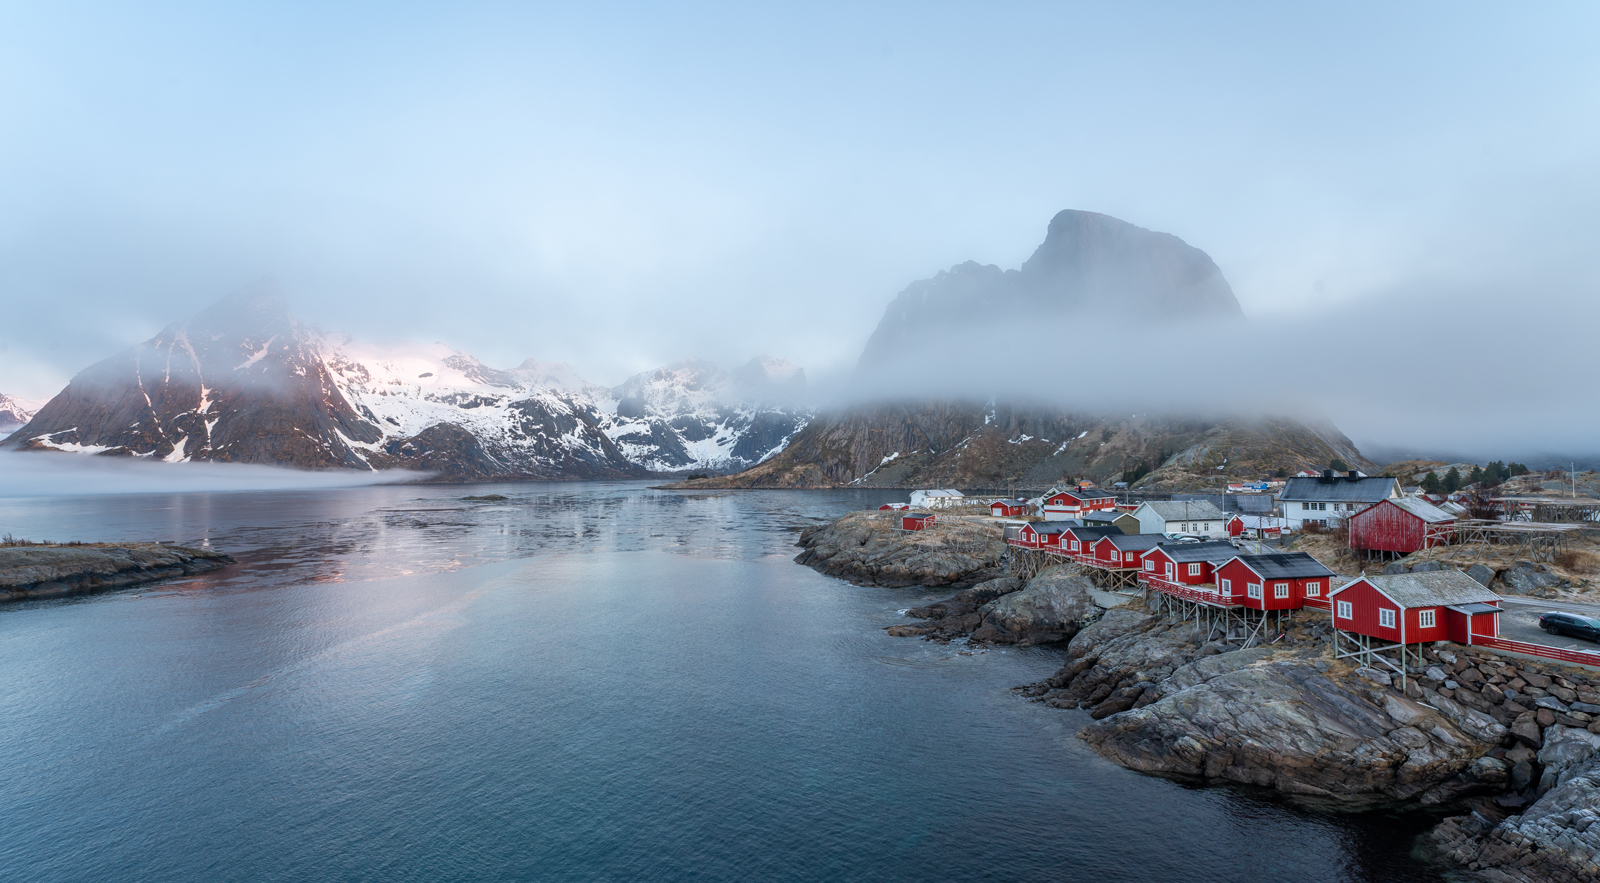 Foggy morning in Lofoten  by Peter Cheung